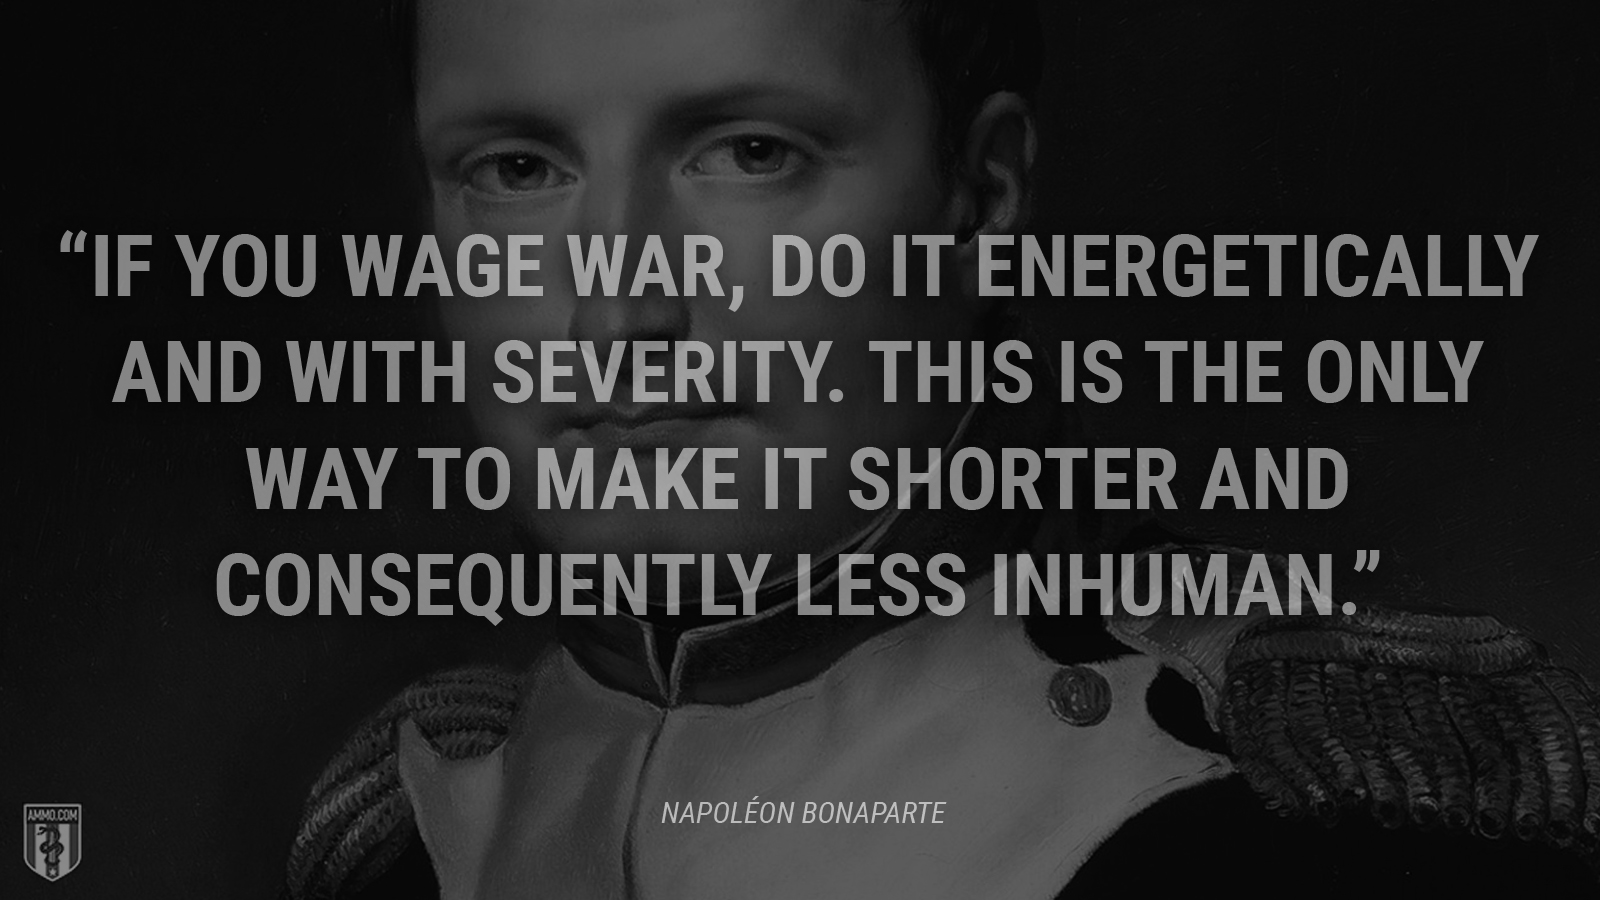 “If you wage war, do it energetically and with severity. This is the only way to make it shorter and consequently less inhuman.” - Napoléon Bonaparte